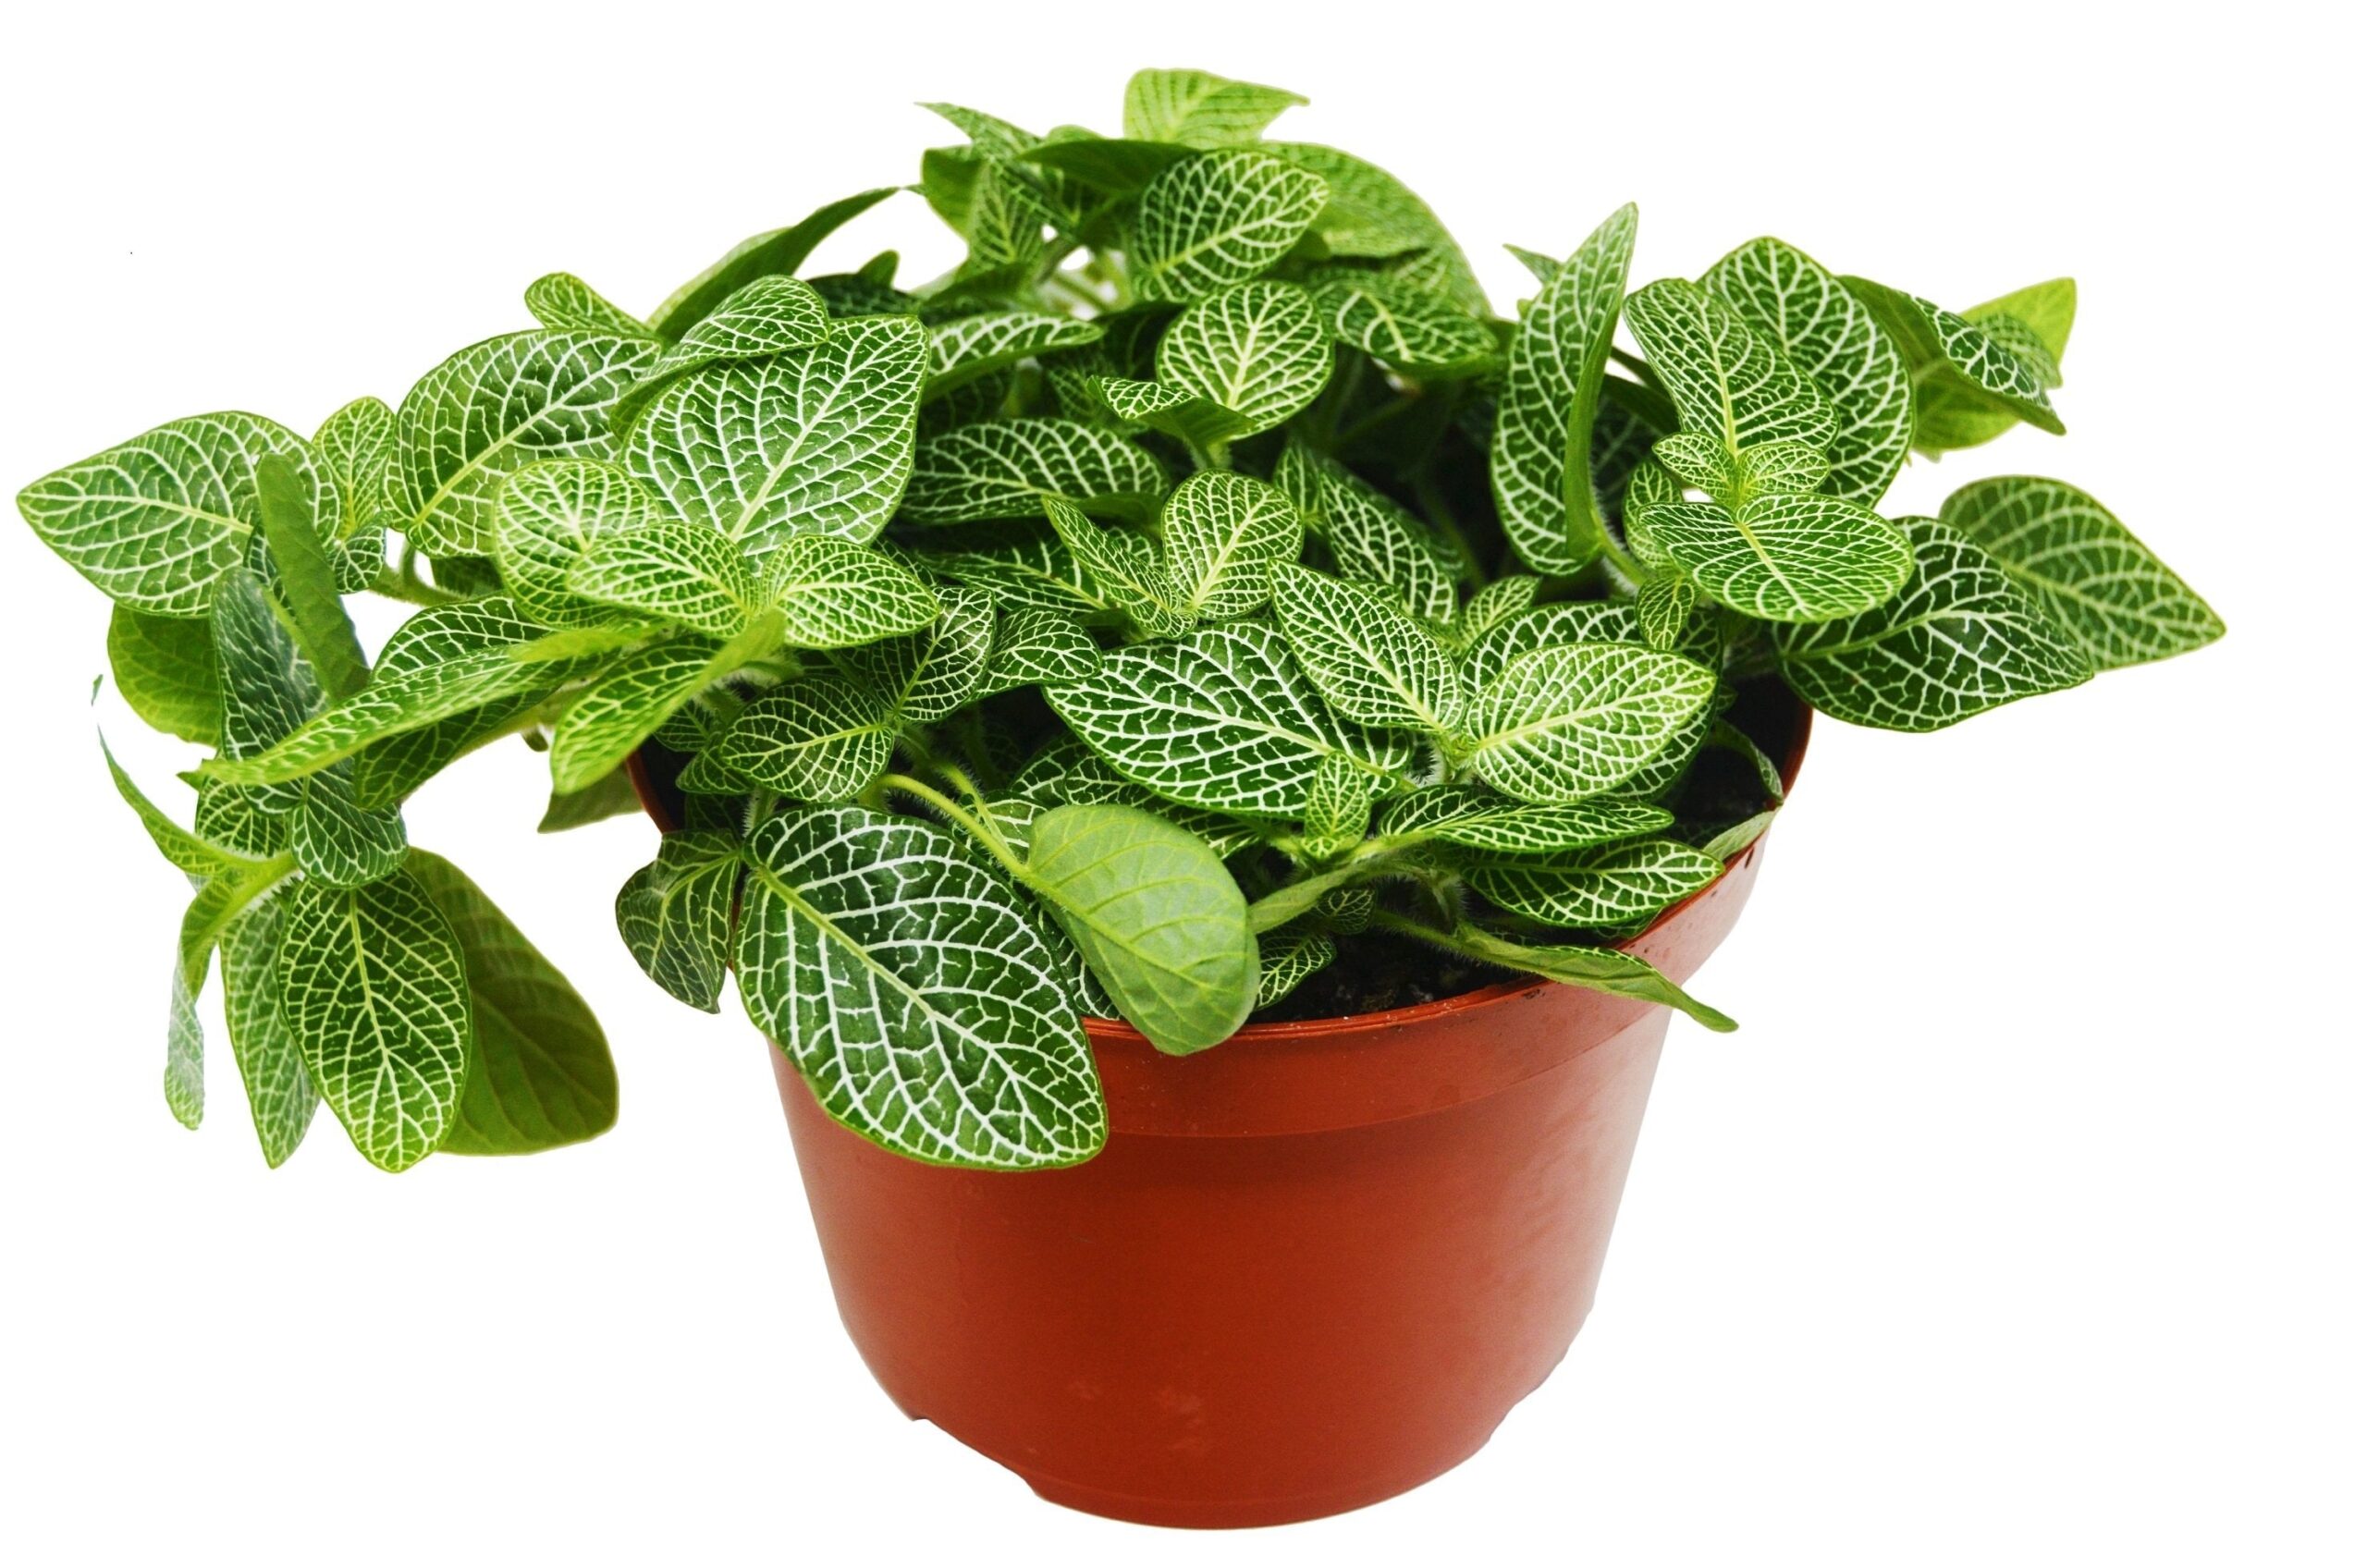 A potted plant with green leaves on a white background. Visit the best plant nursery near me for top-quality plants.